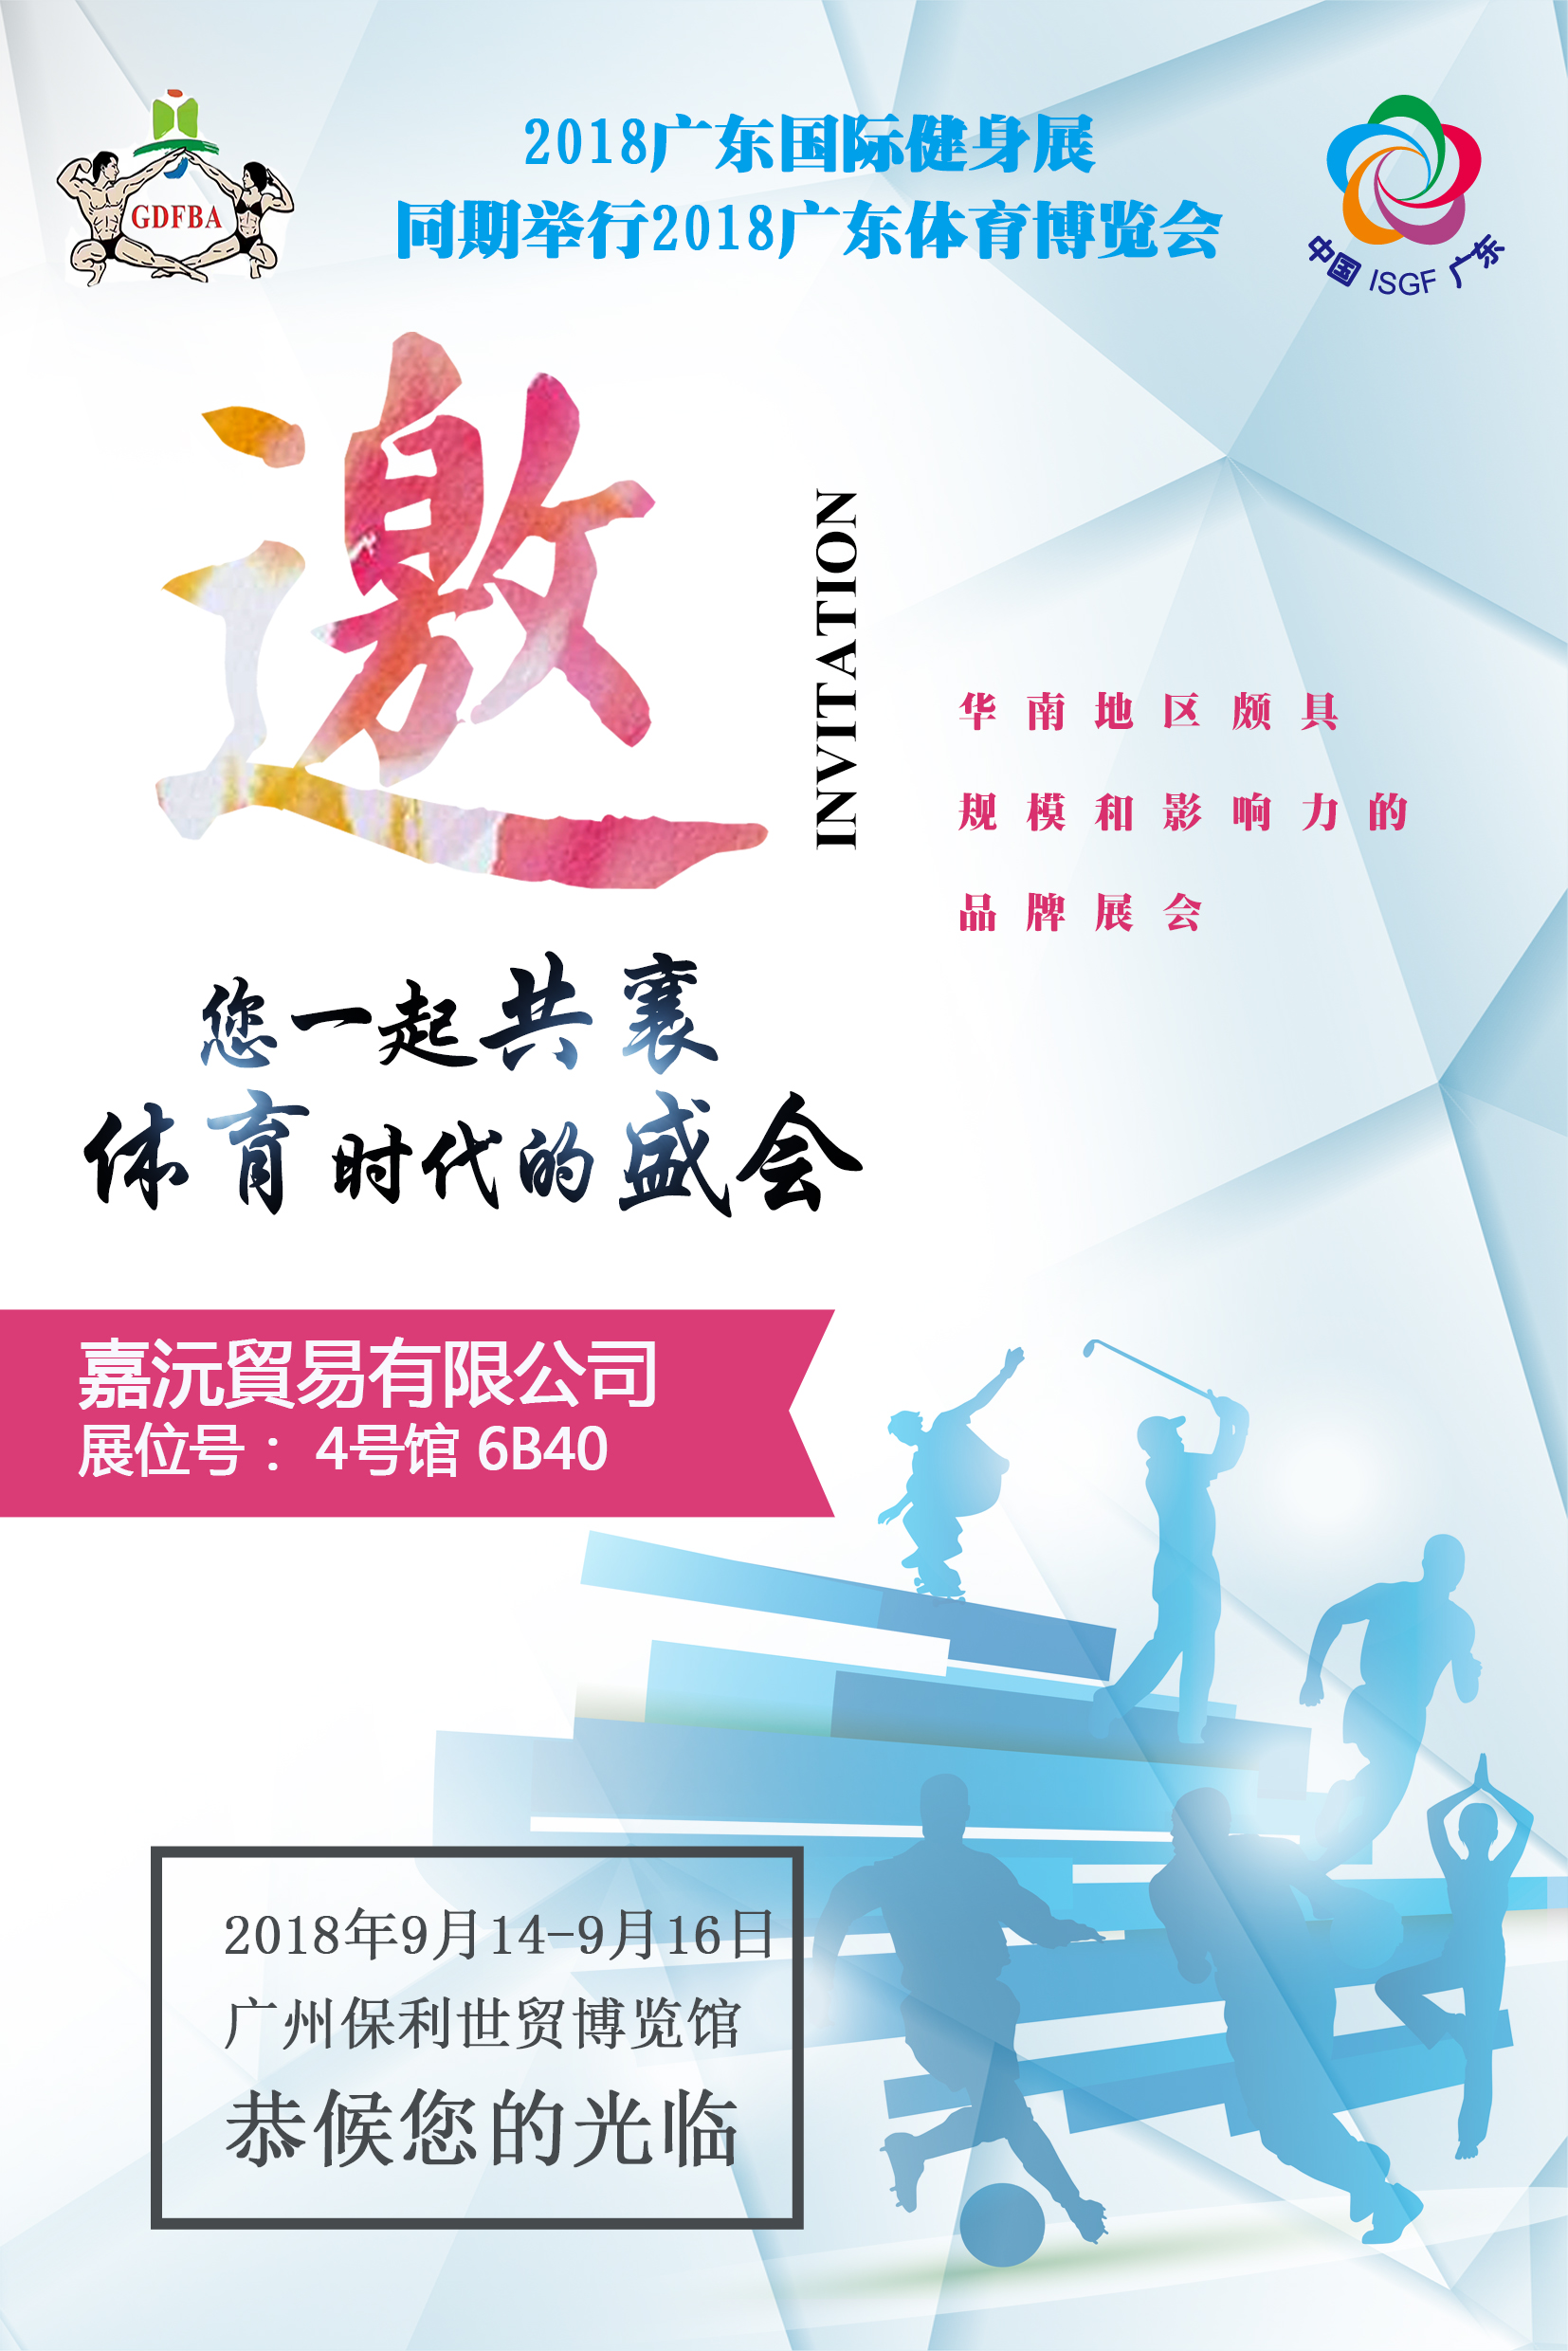 2018 Guangdong Sport Show【Invitation】